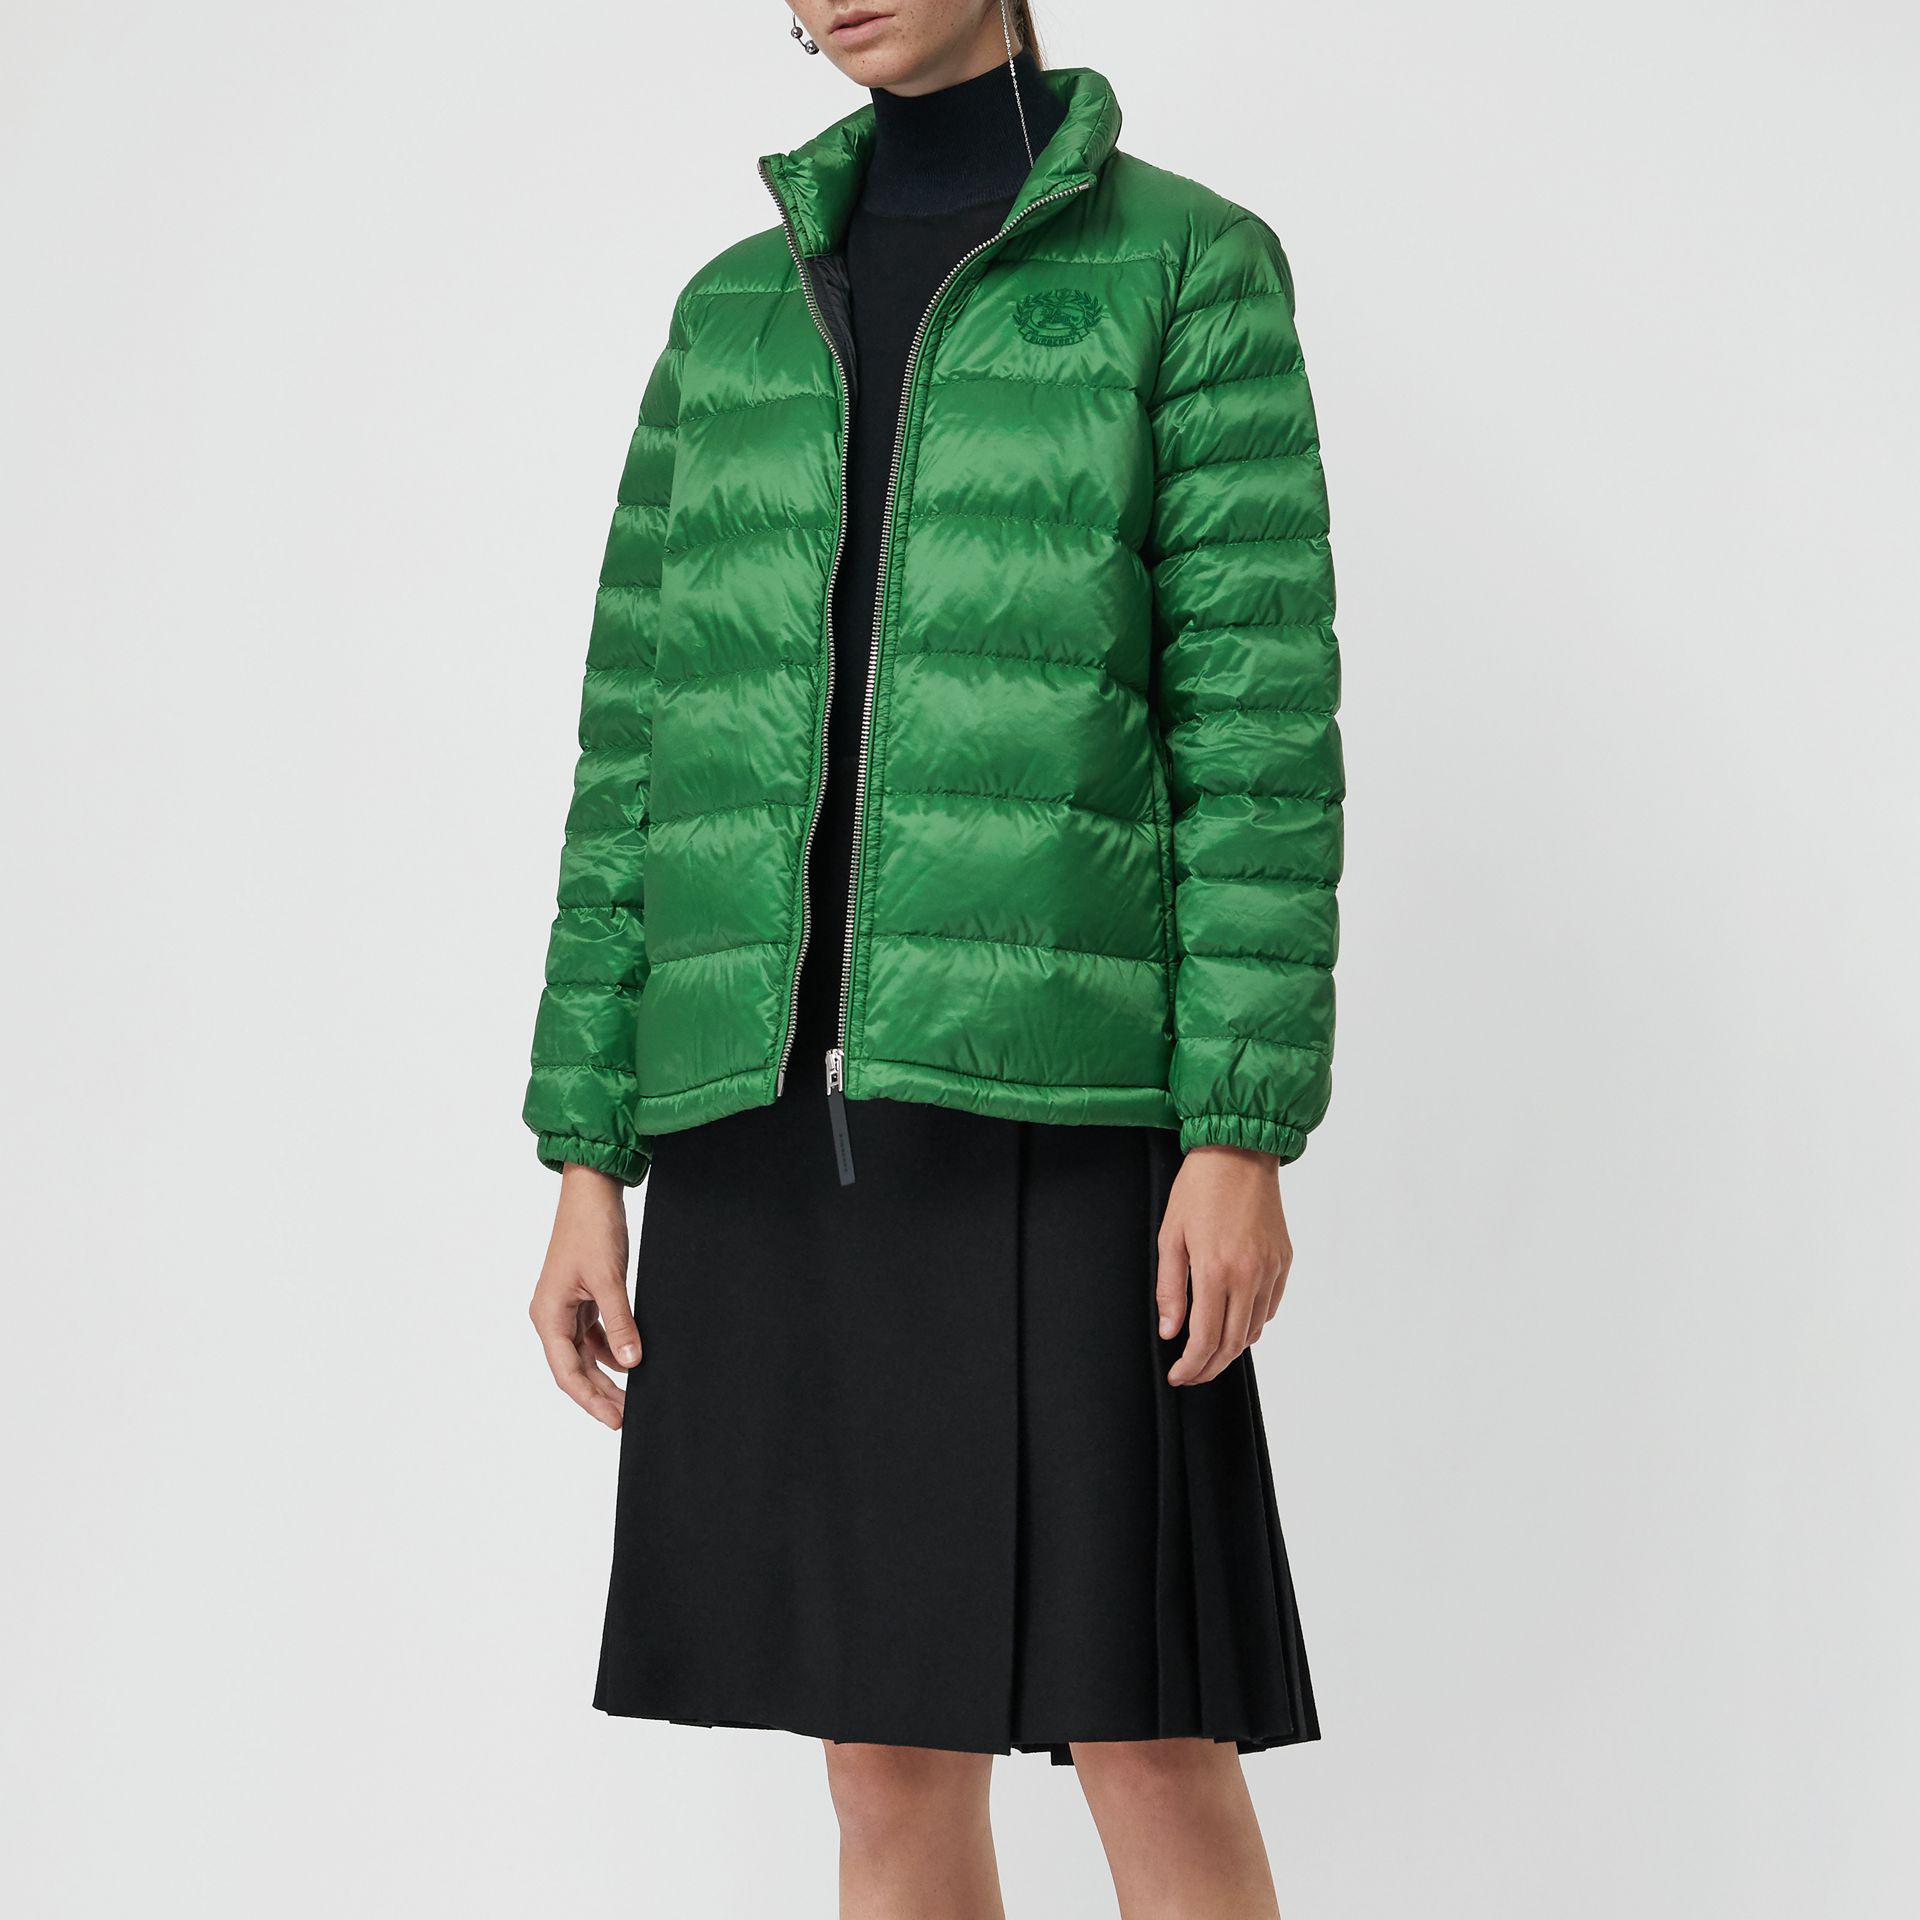 Burberry Goose Down-filled Puffer Jacket in Emerald Green (Green) - Lyst